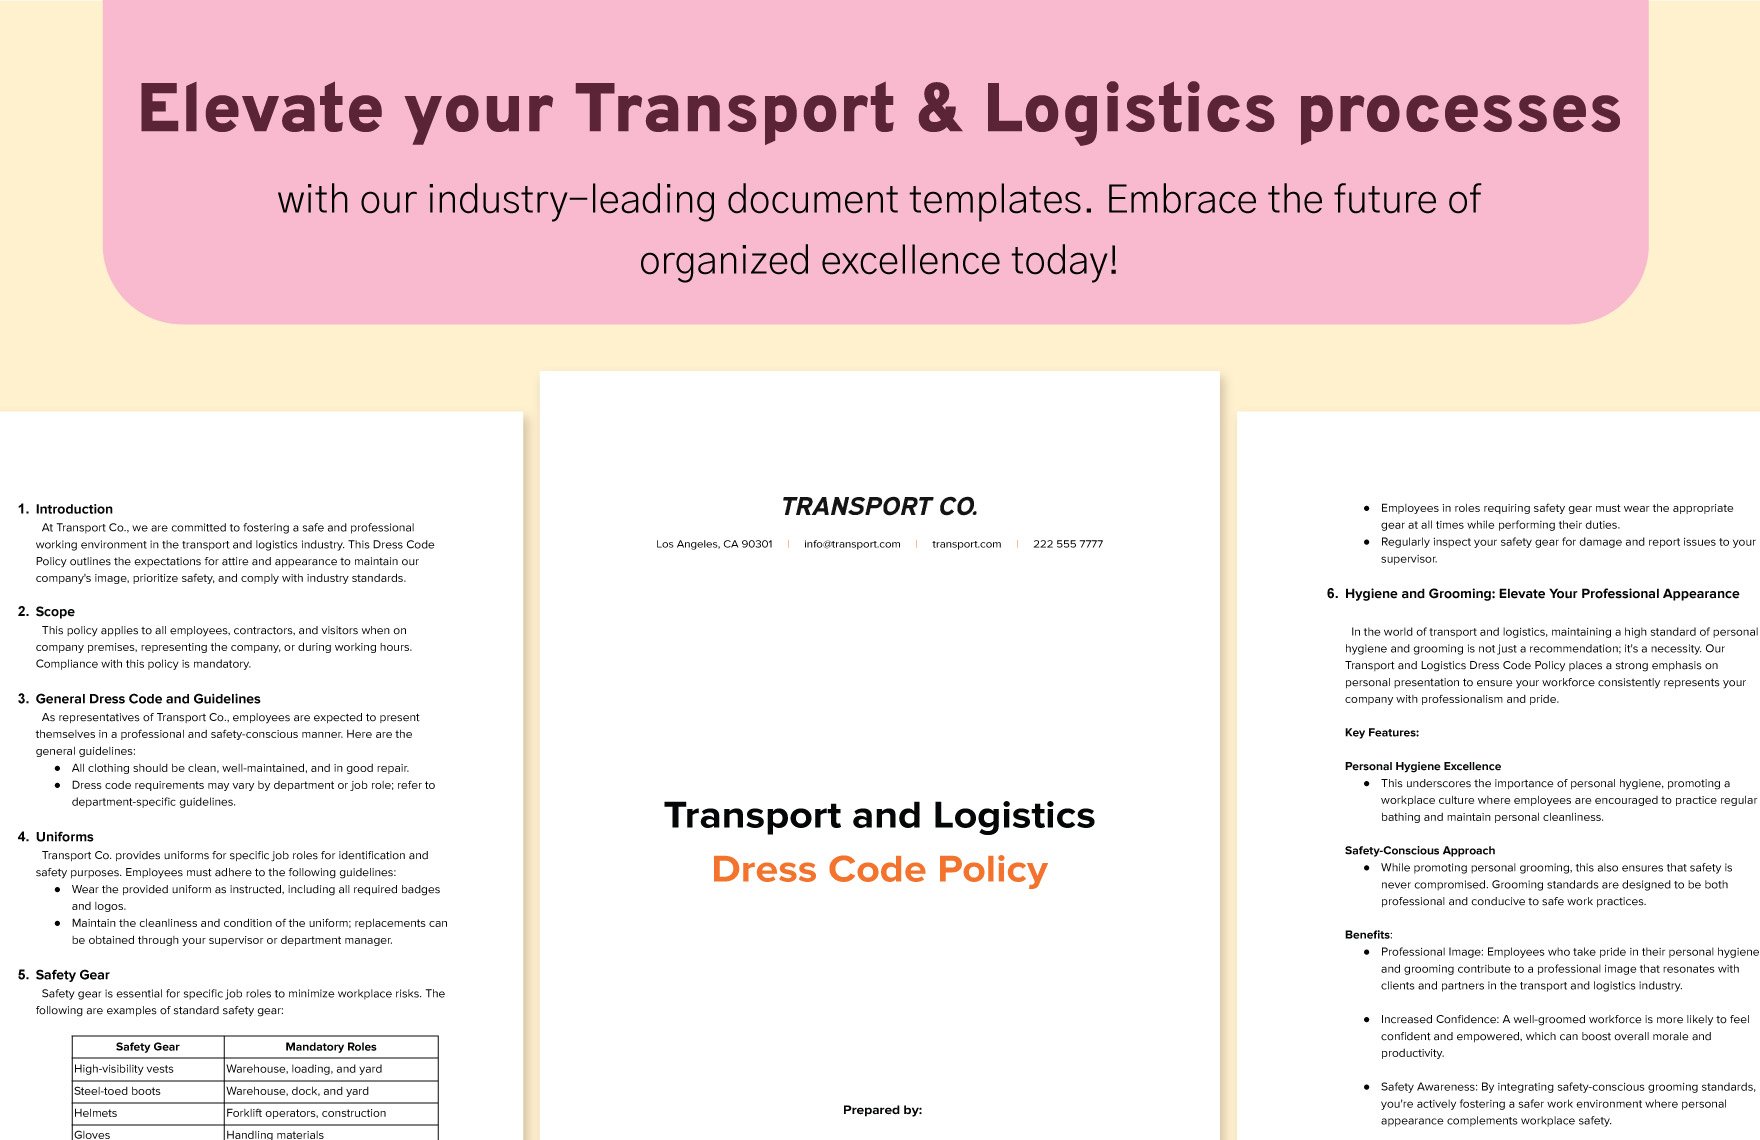 Transport and Logistics Dress Code Policy Template